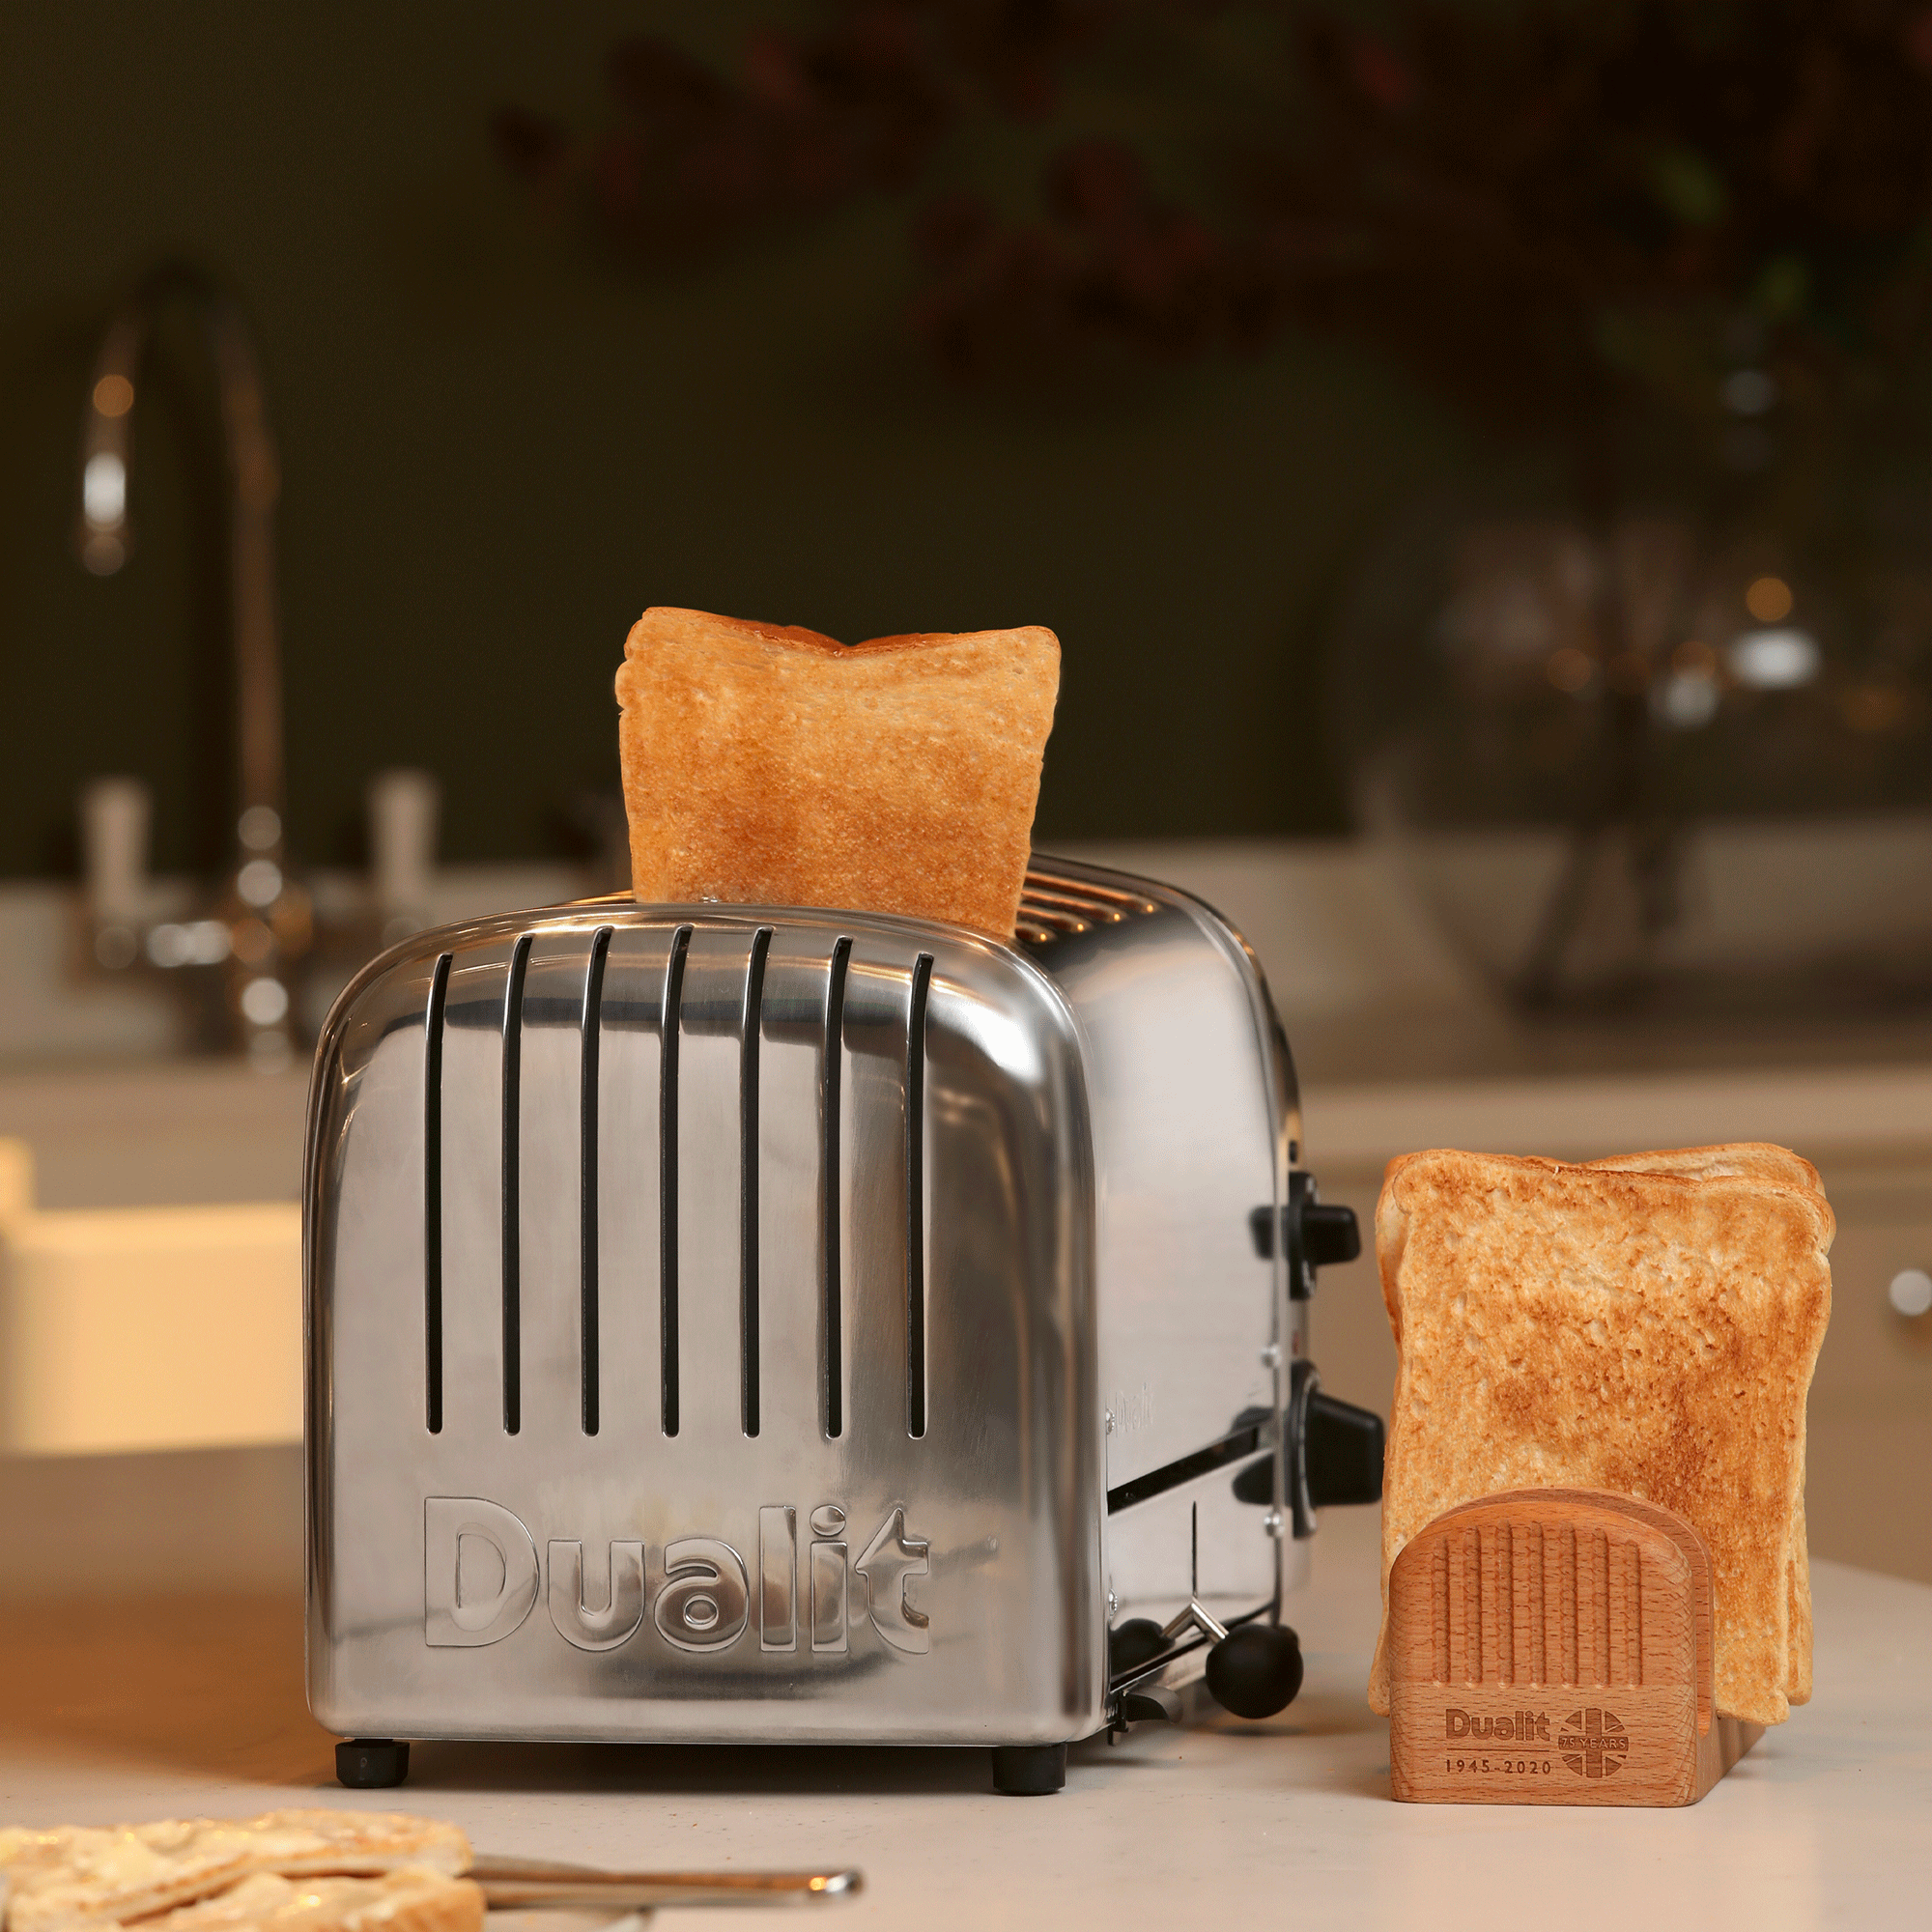 Dualit silver toaster